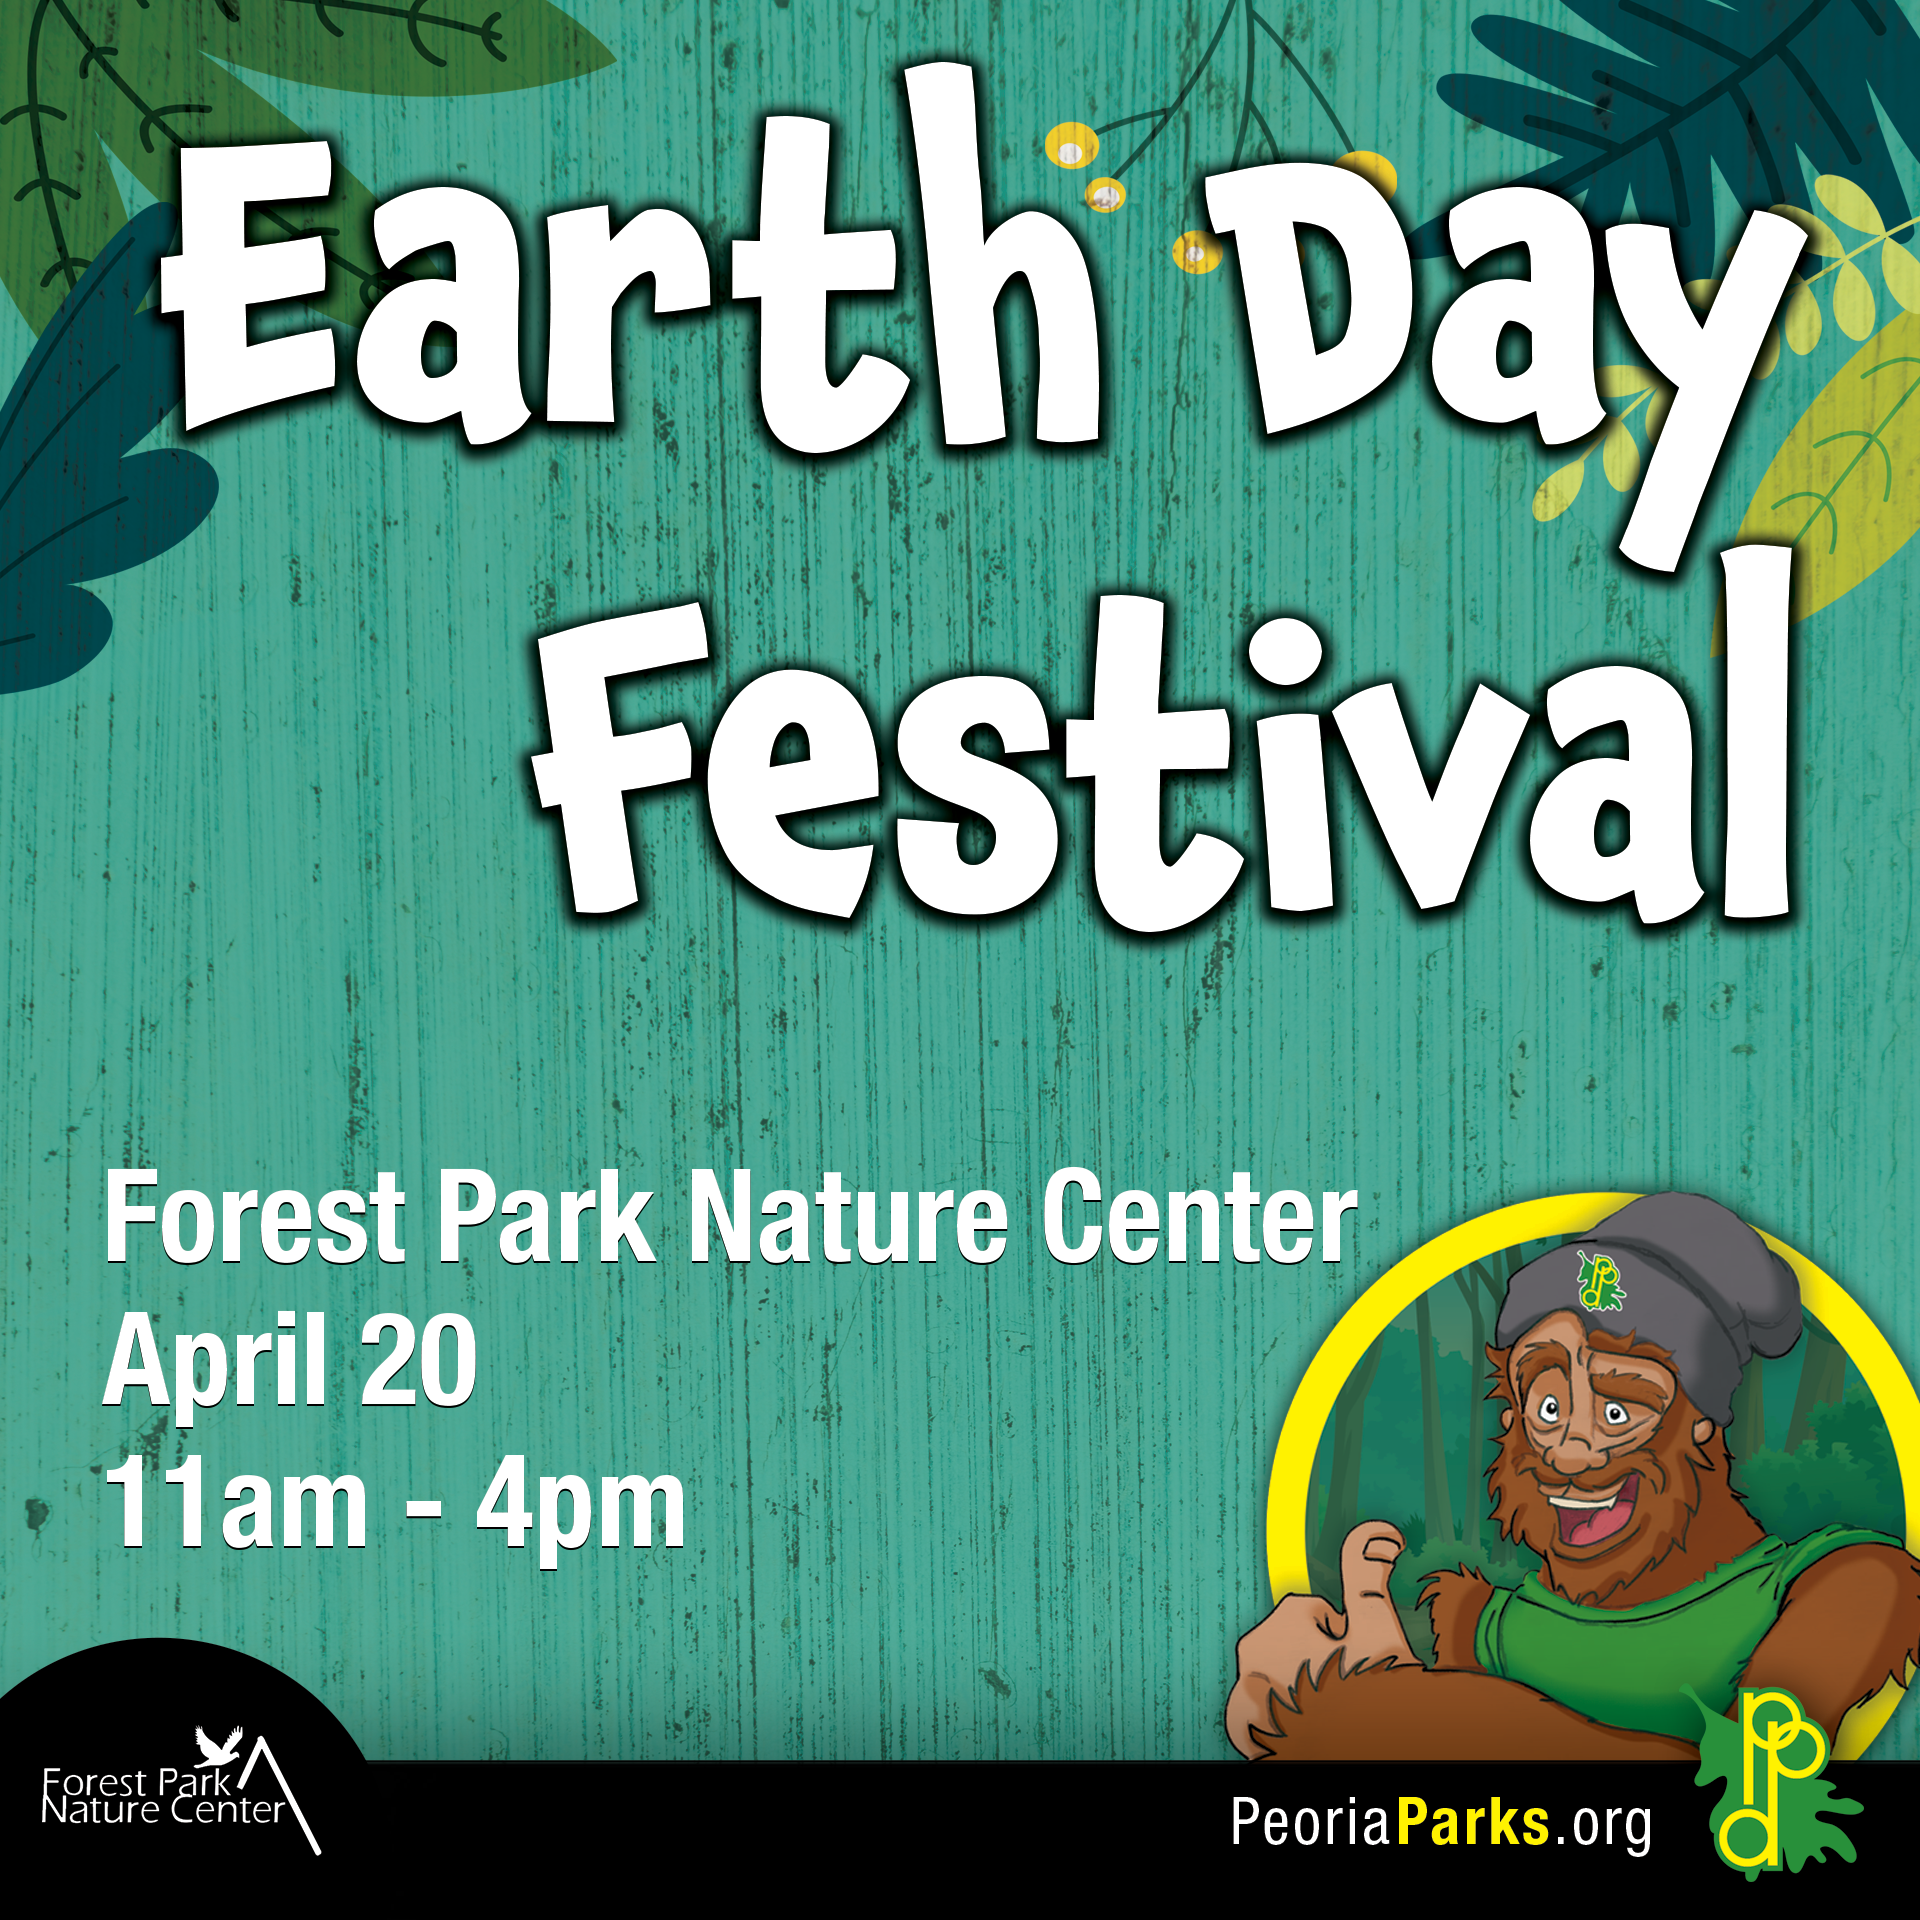 Earth Day Festival at Forest Park Nature Center